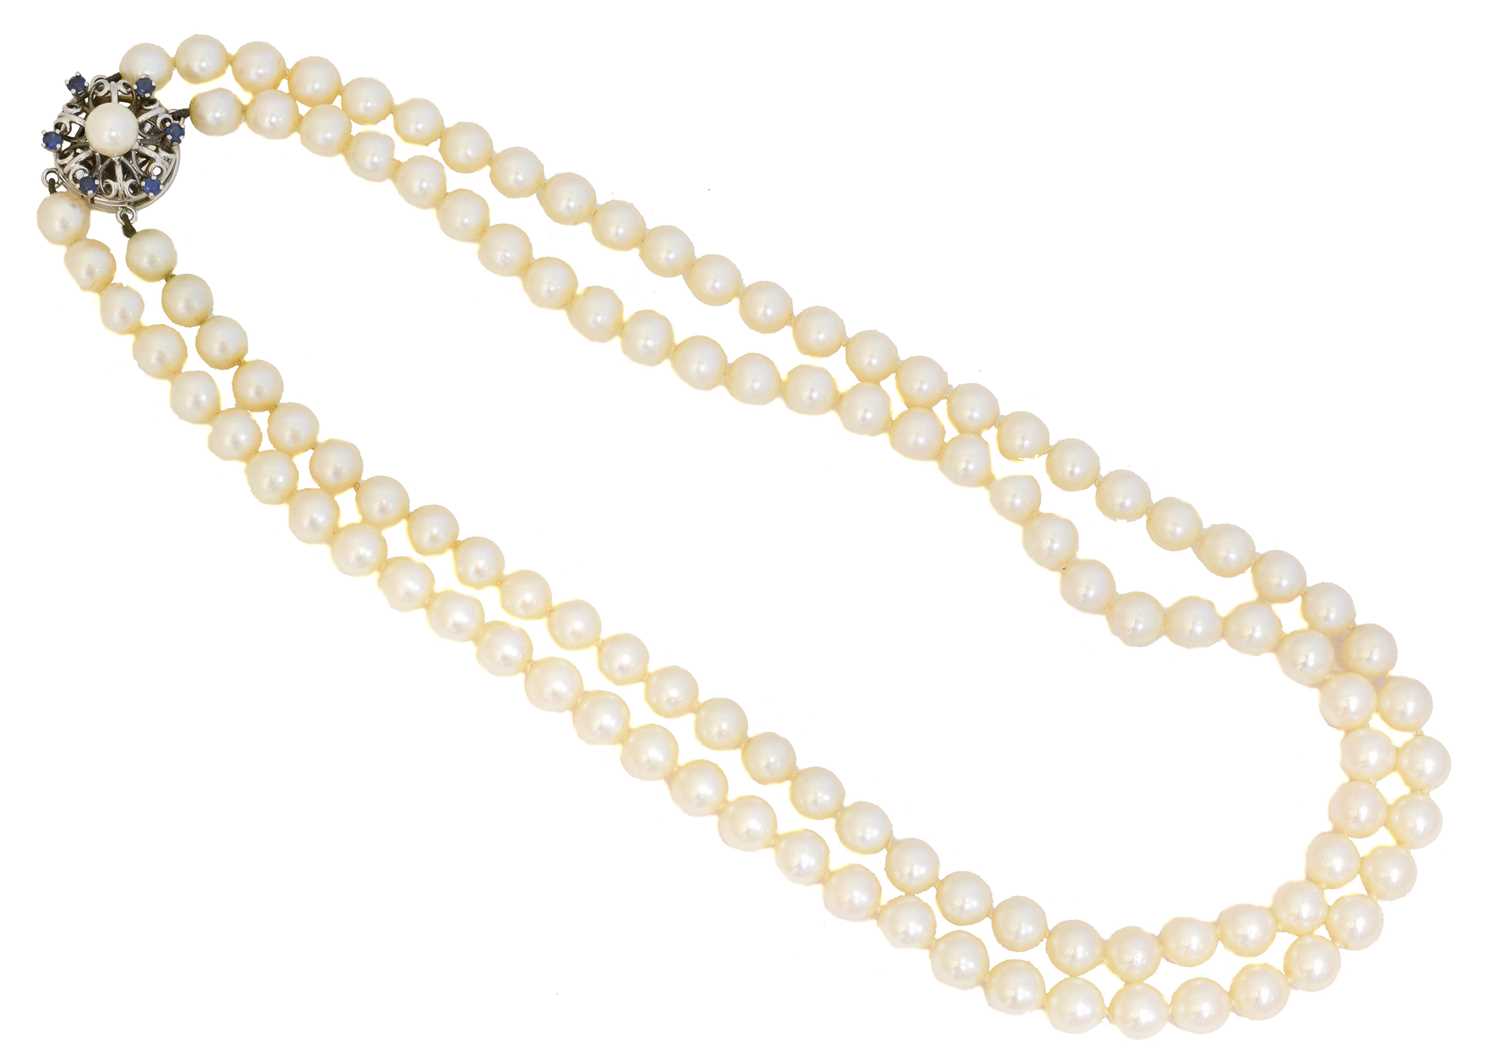 Lot A cultured pearl necklace